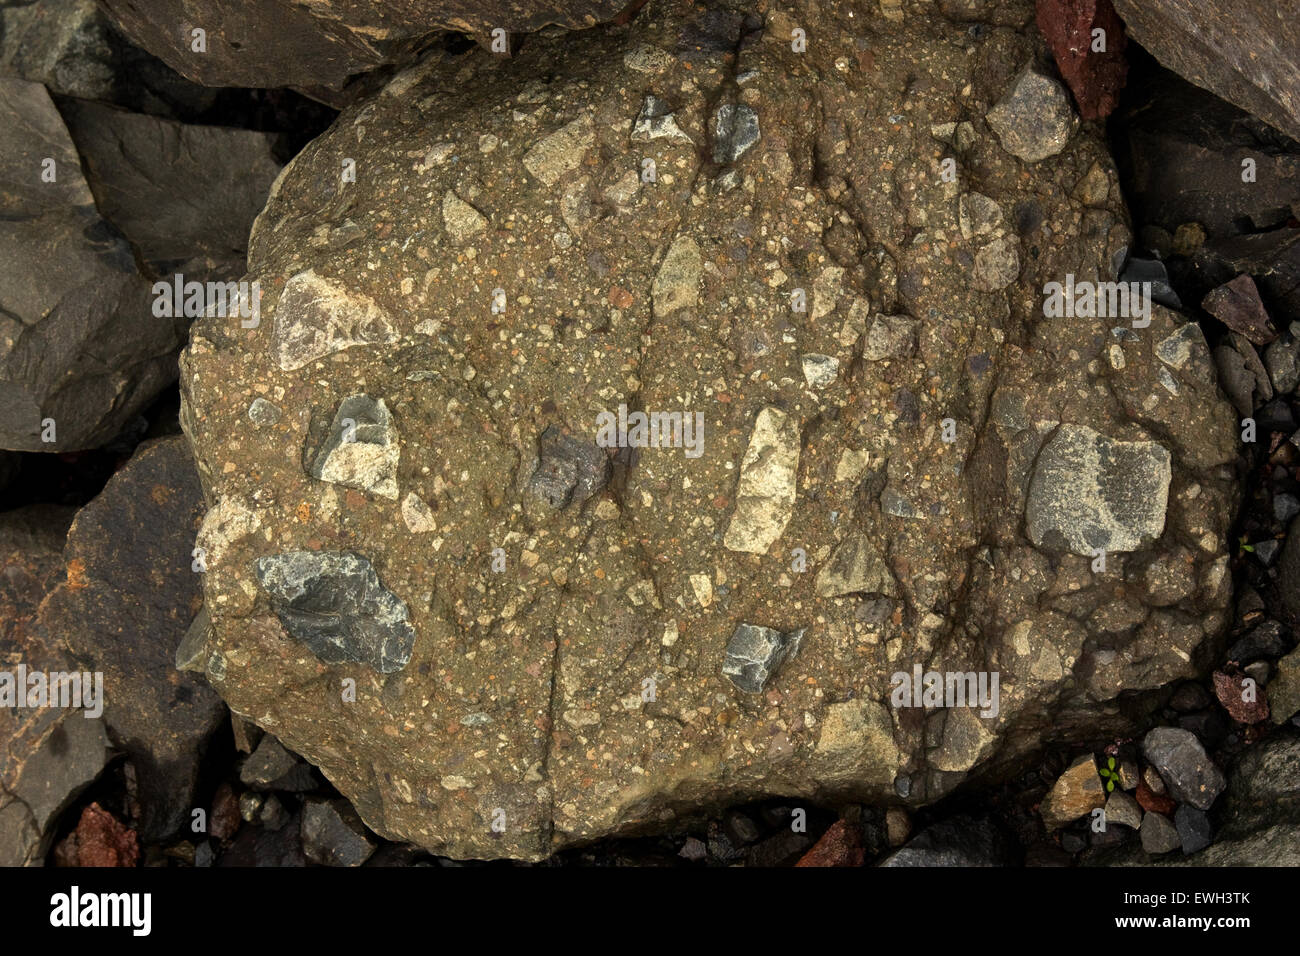 Tillite (lithified till - unsorted glacial sediment) Stock Photo